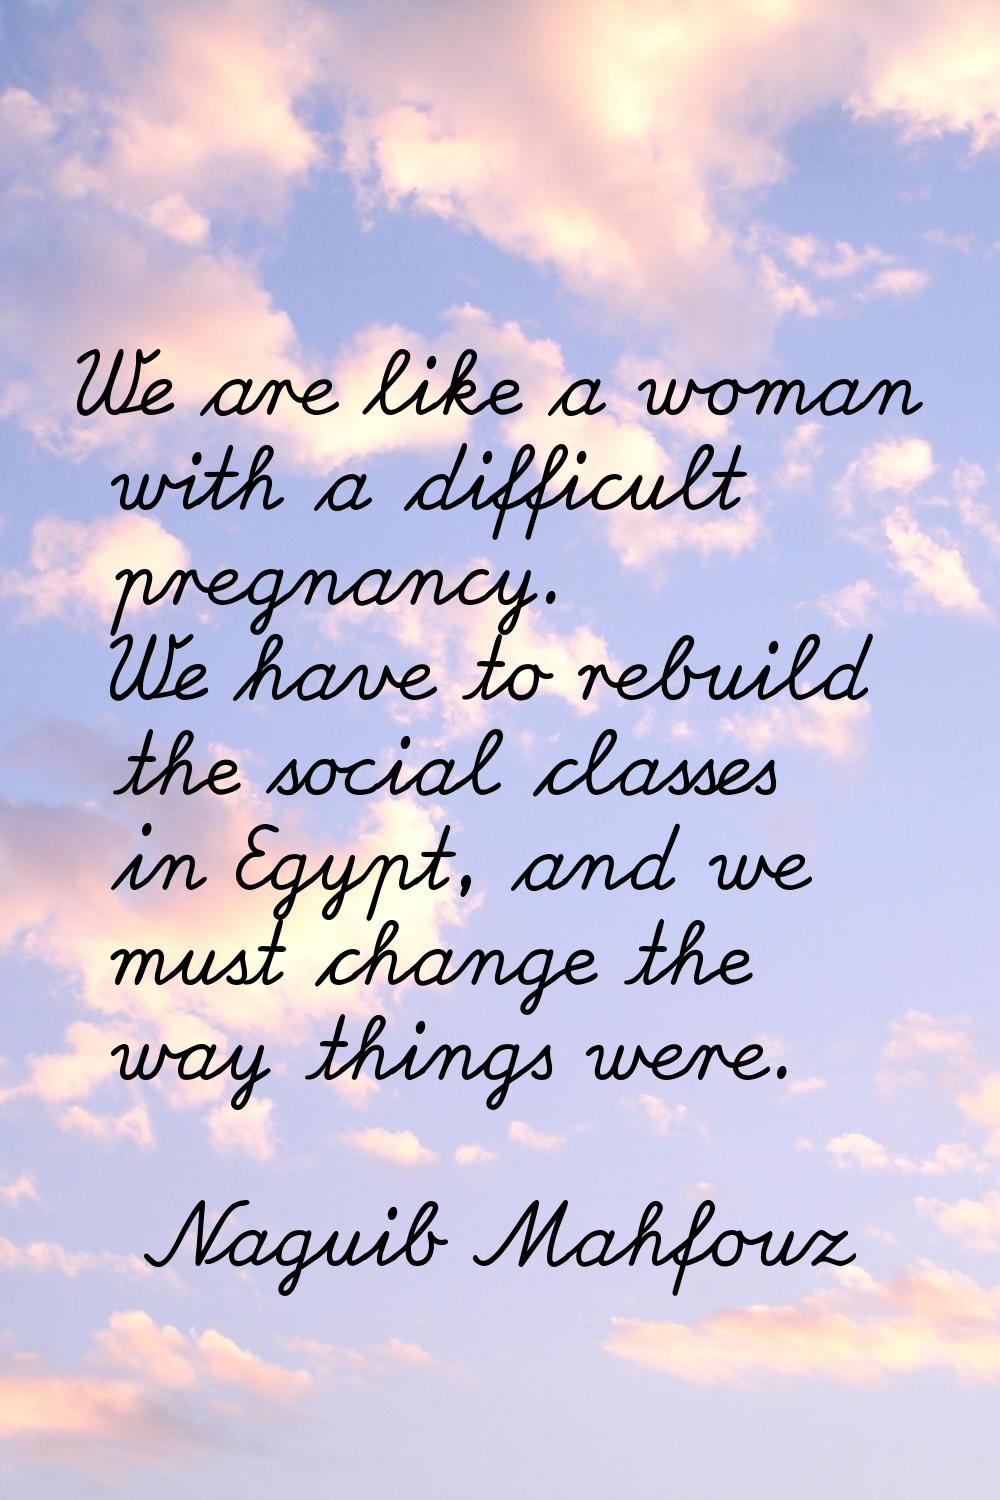 We are like a woman with a difficult pregnancy. We have to rebuild the social classes in Egypt, and